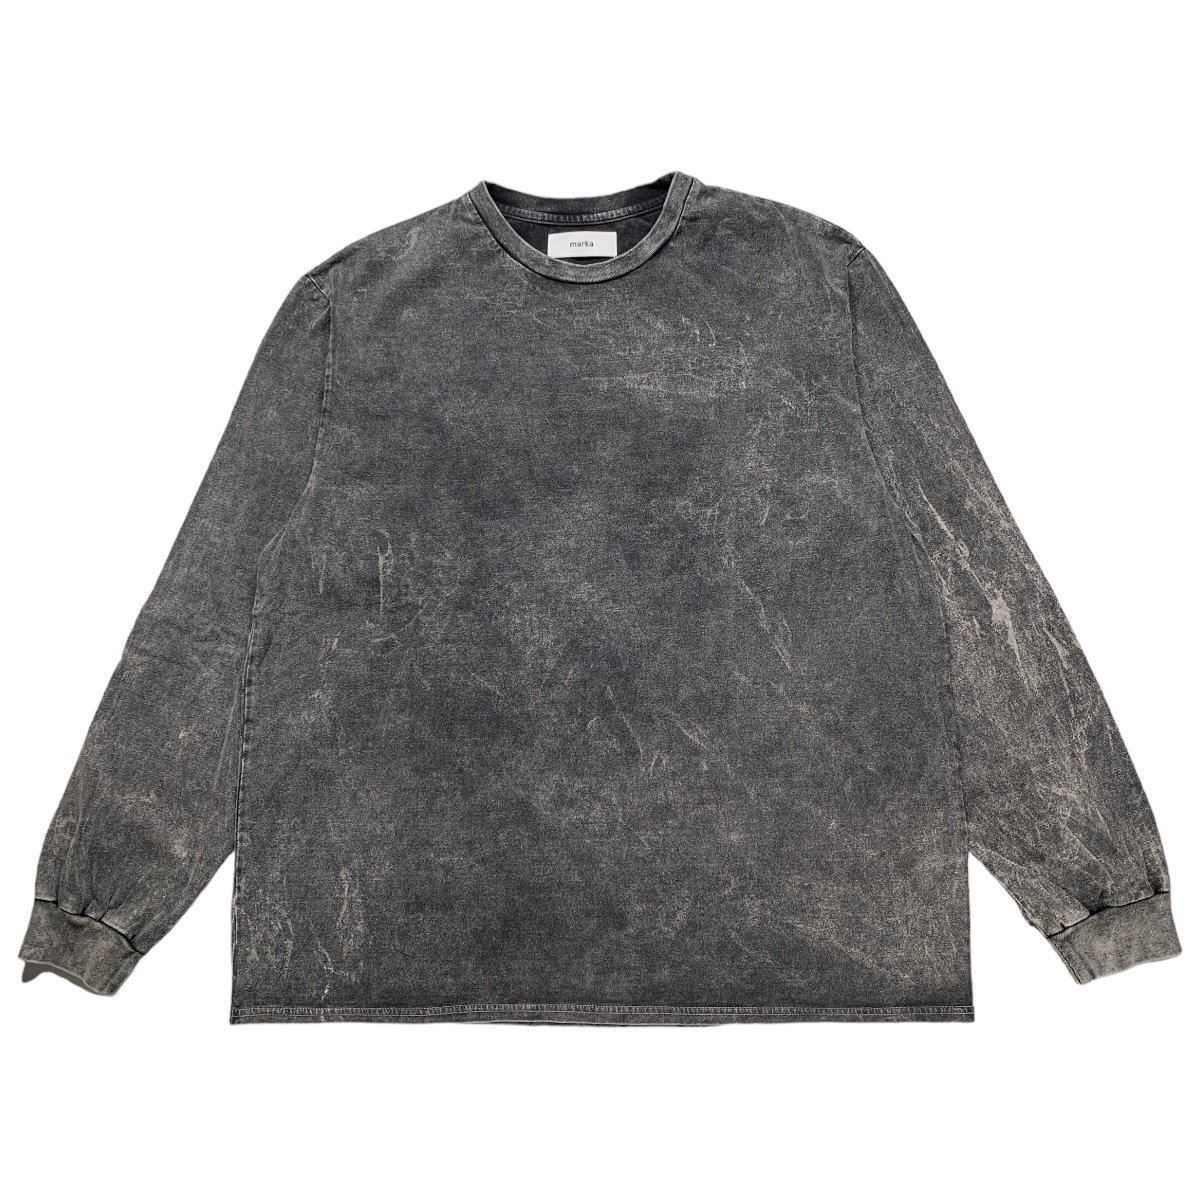 marka <BR>CREW NECK TEE L/S - 40/2 ORGANIC COTTON KNIT -(BLEACHED)